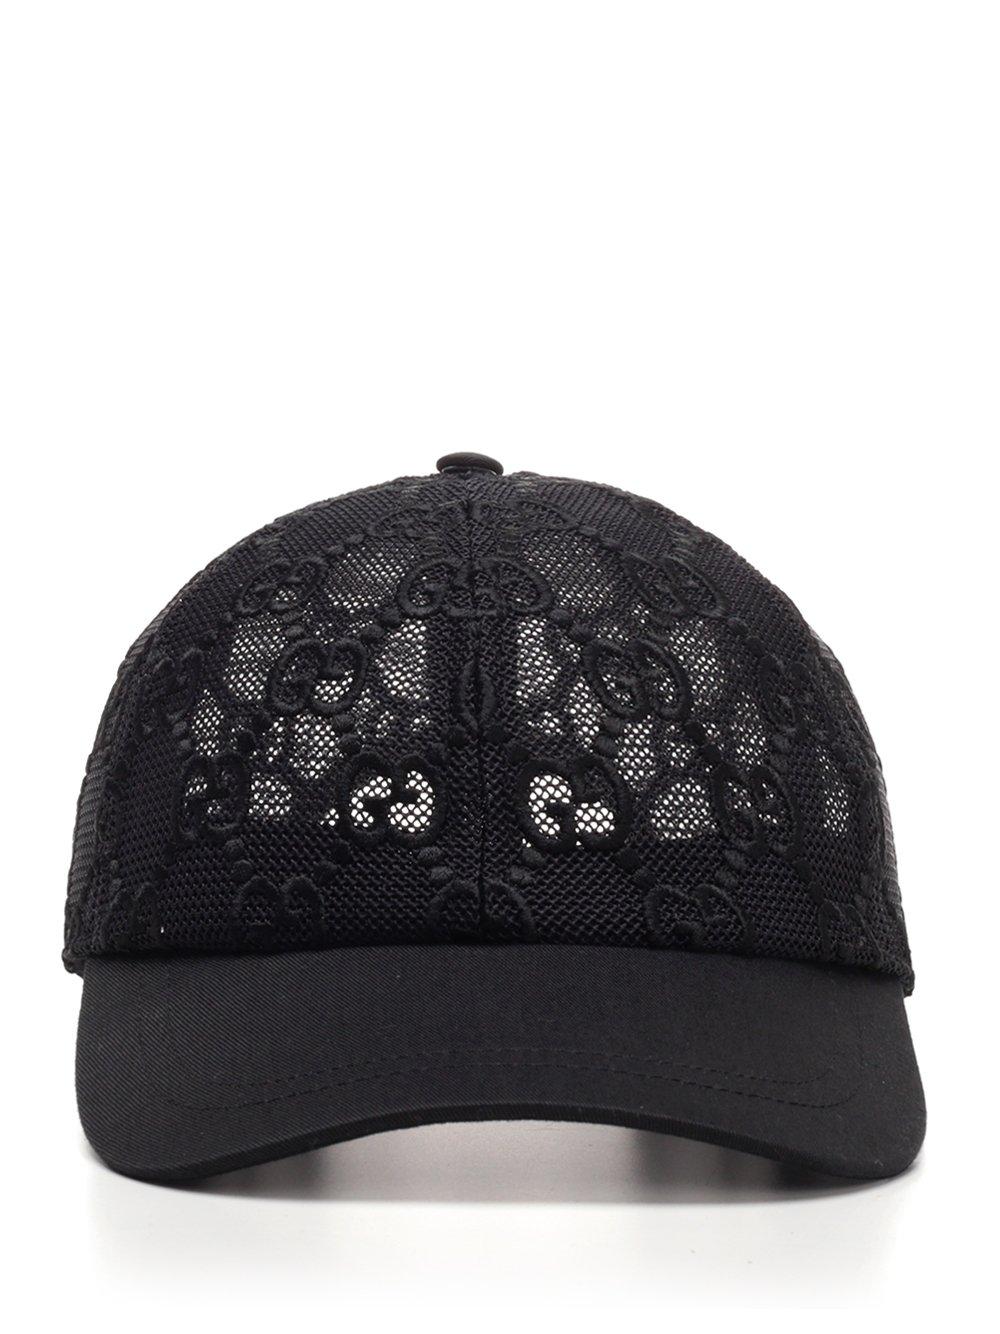 Gucci GG Embroidered Cotton Lace Baseball Cap in Black | Lyst